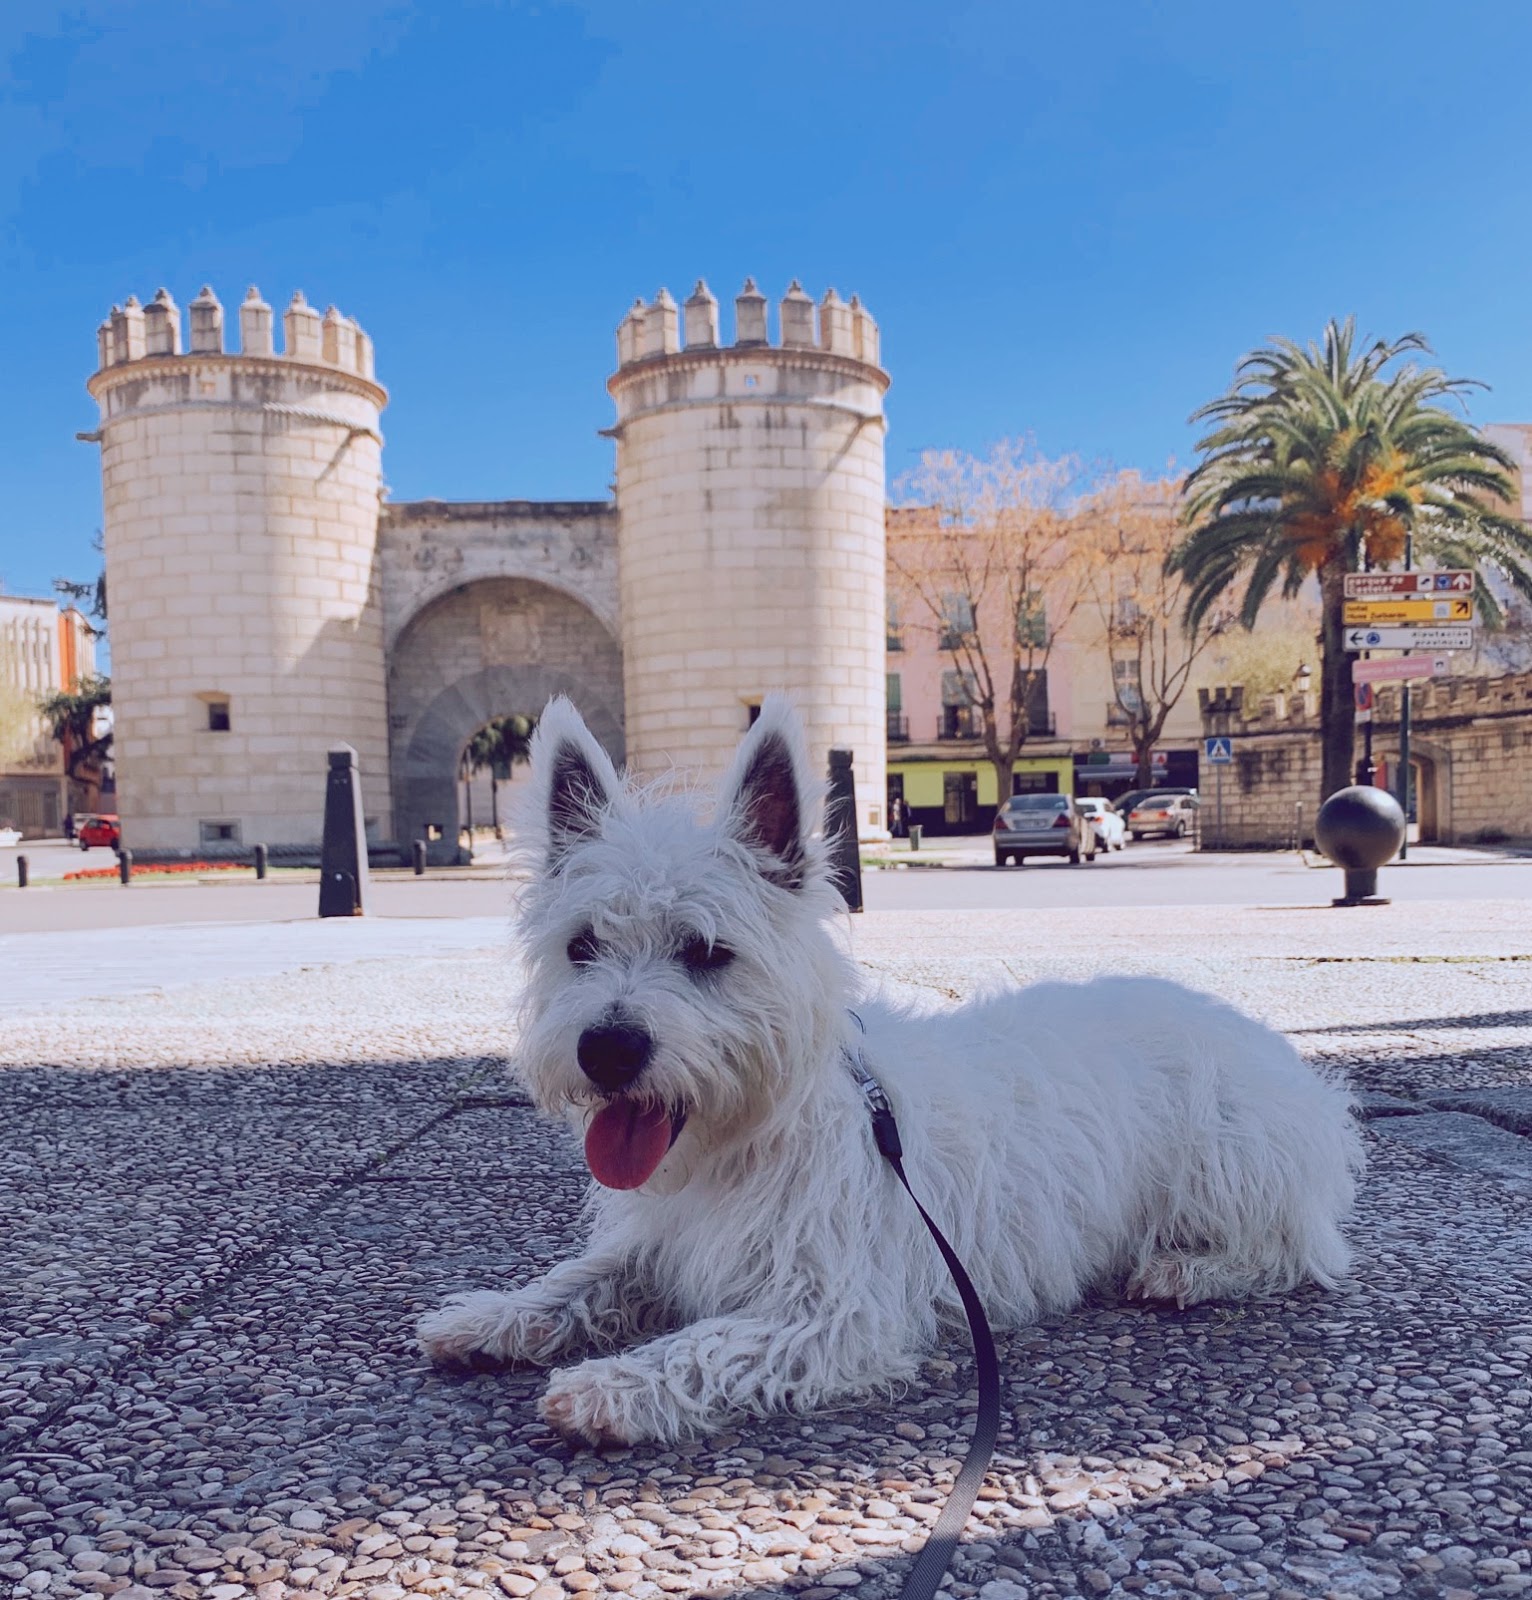 Things I packed on our first trip with our Westie puppy